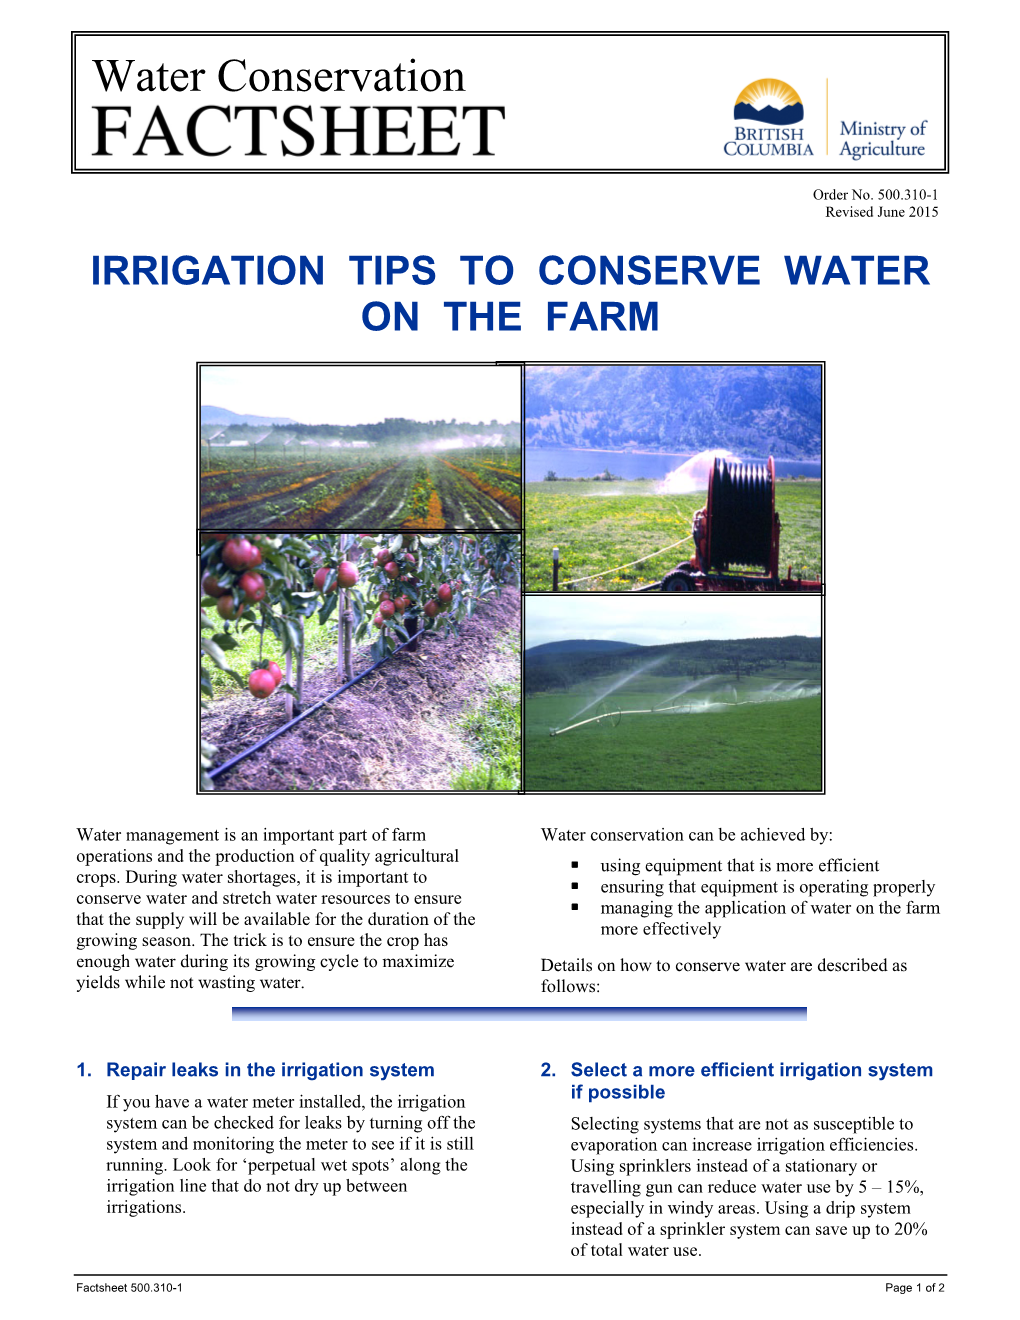 Irrigation Tips to Conserve Water on the Farm